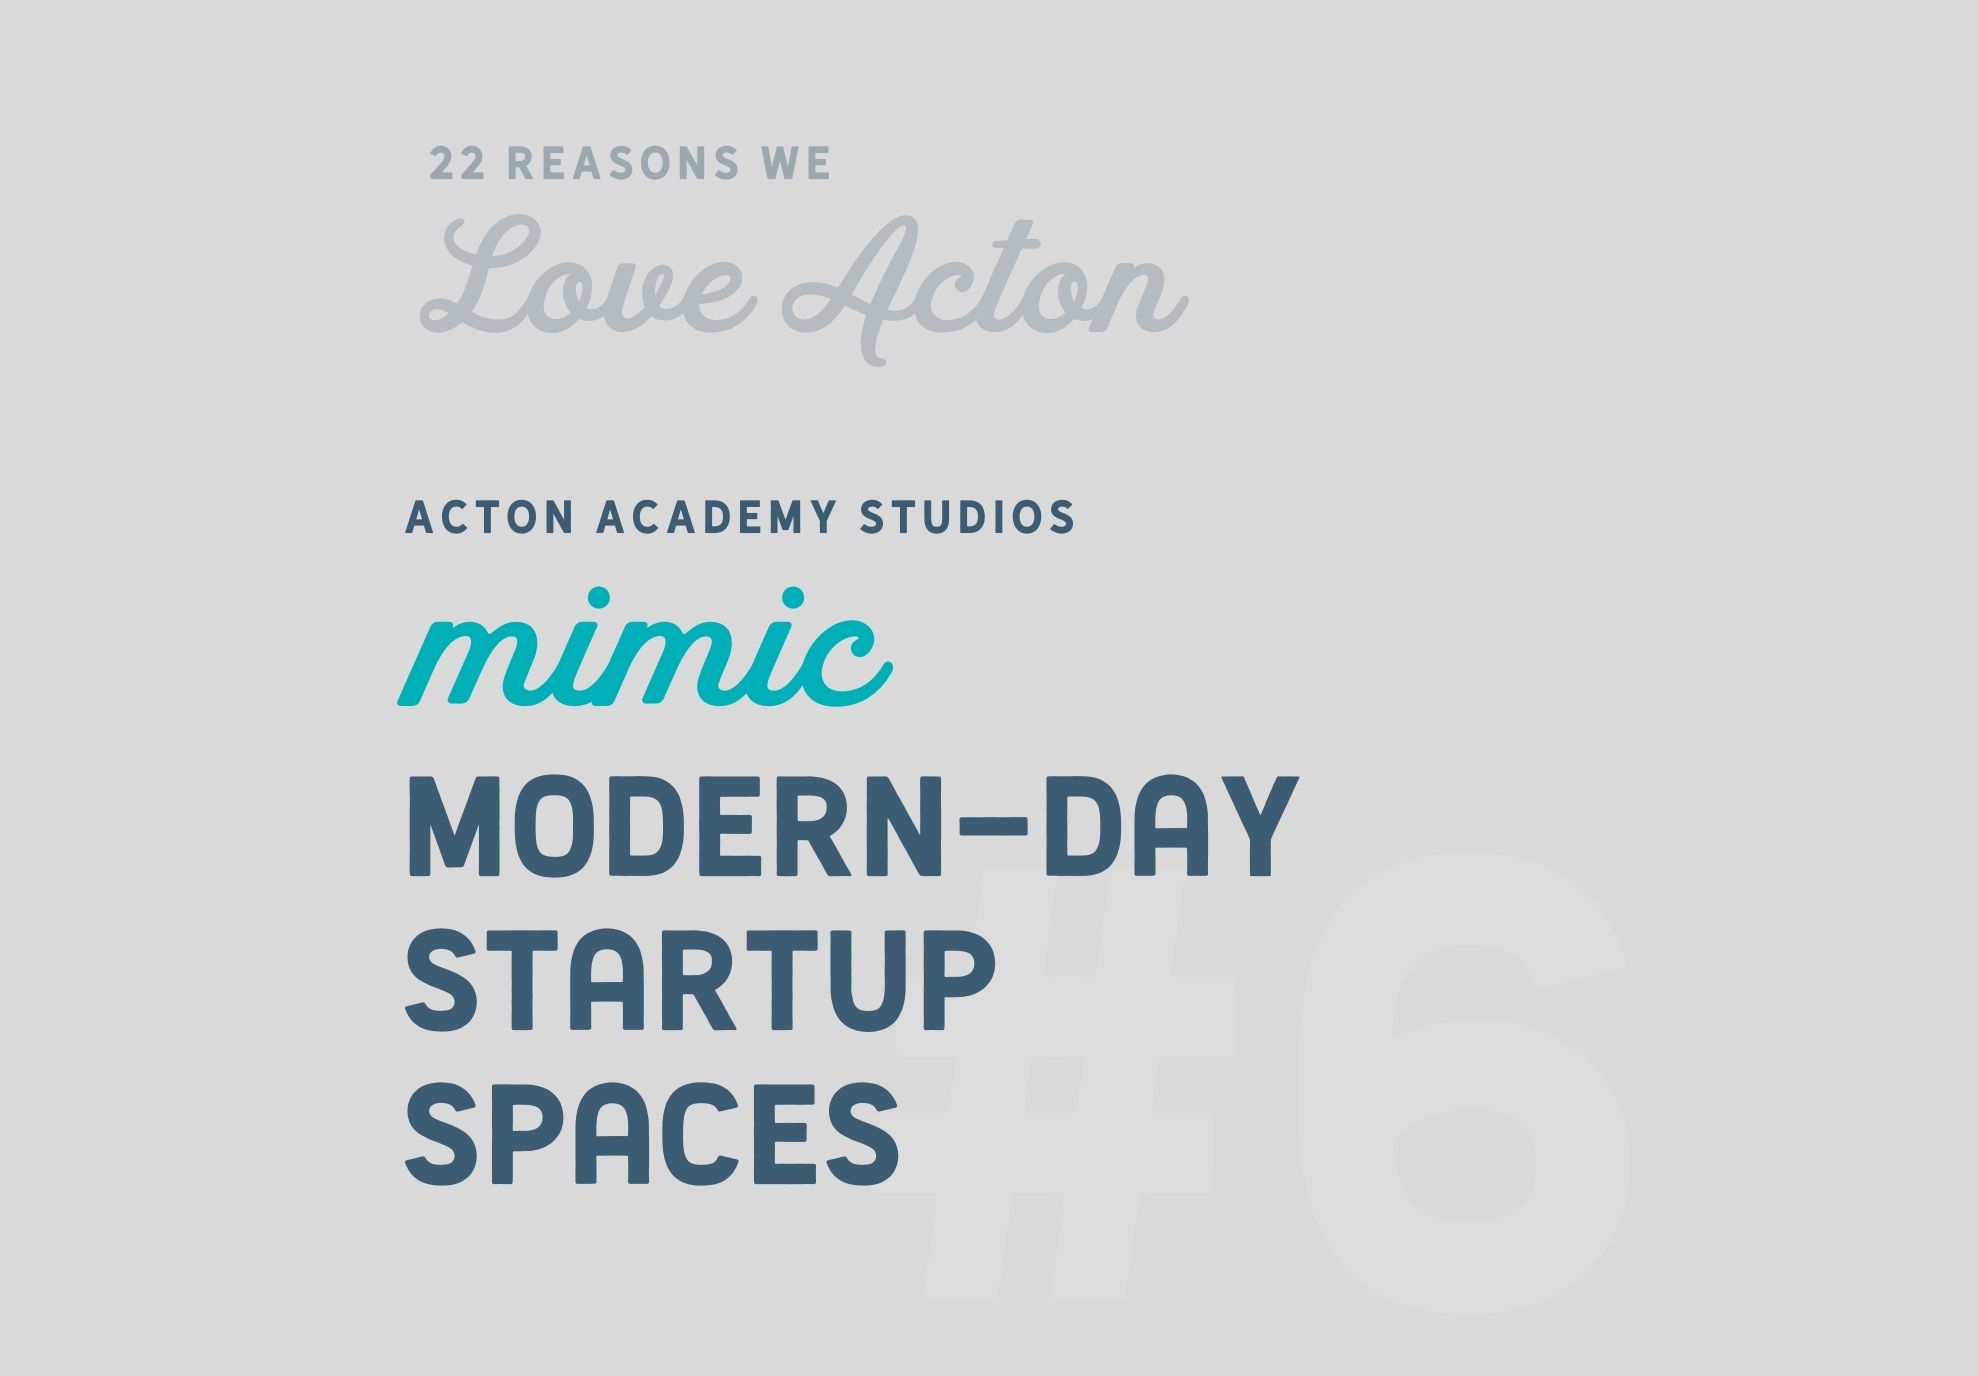 #6 Acton Academy Studios Mimic Modern-Day Startup Spaces